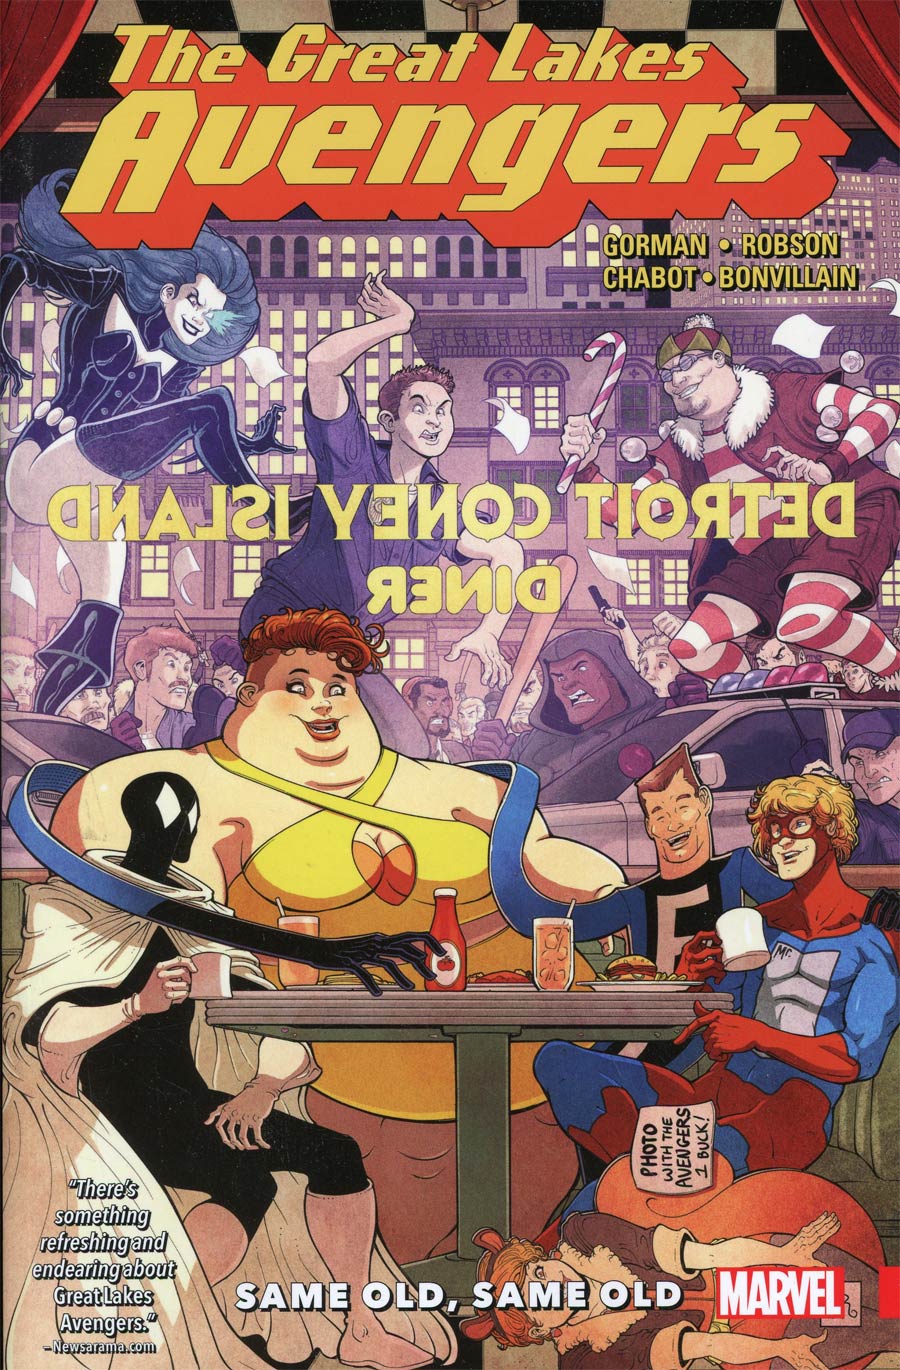 Great Lakes Avengers Same Old Same Old TP